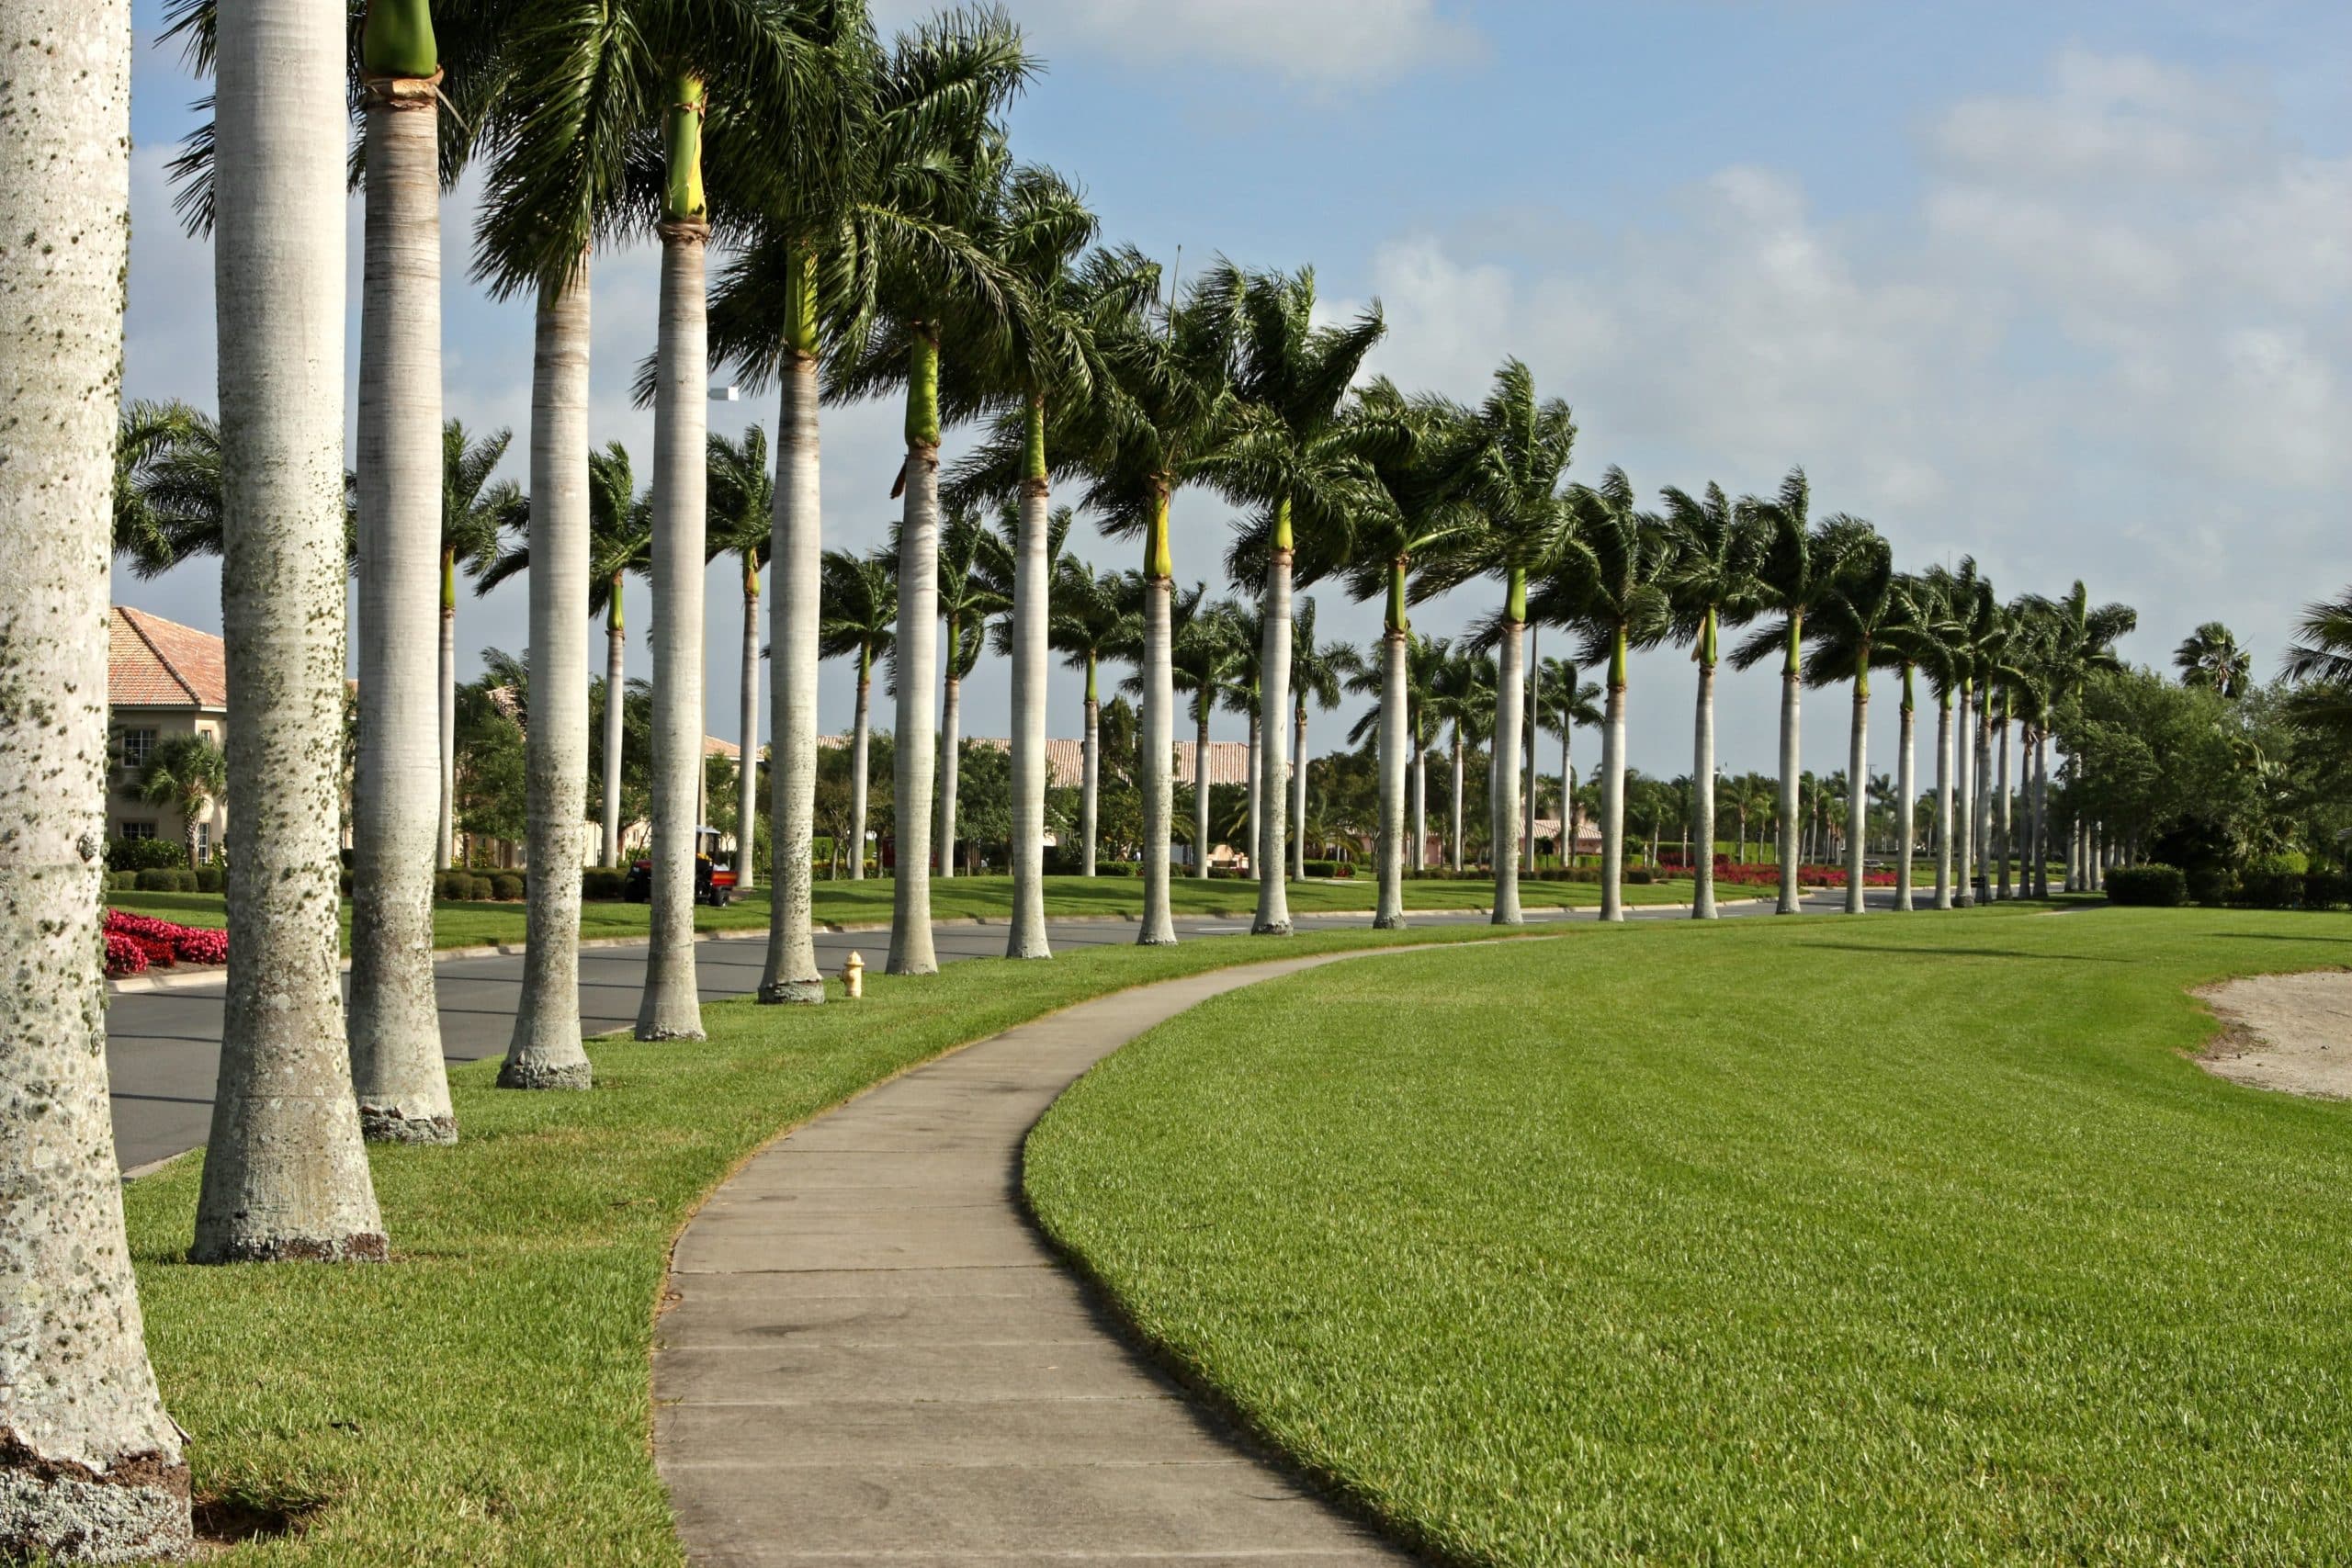 A sidewalk lined with palm trees